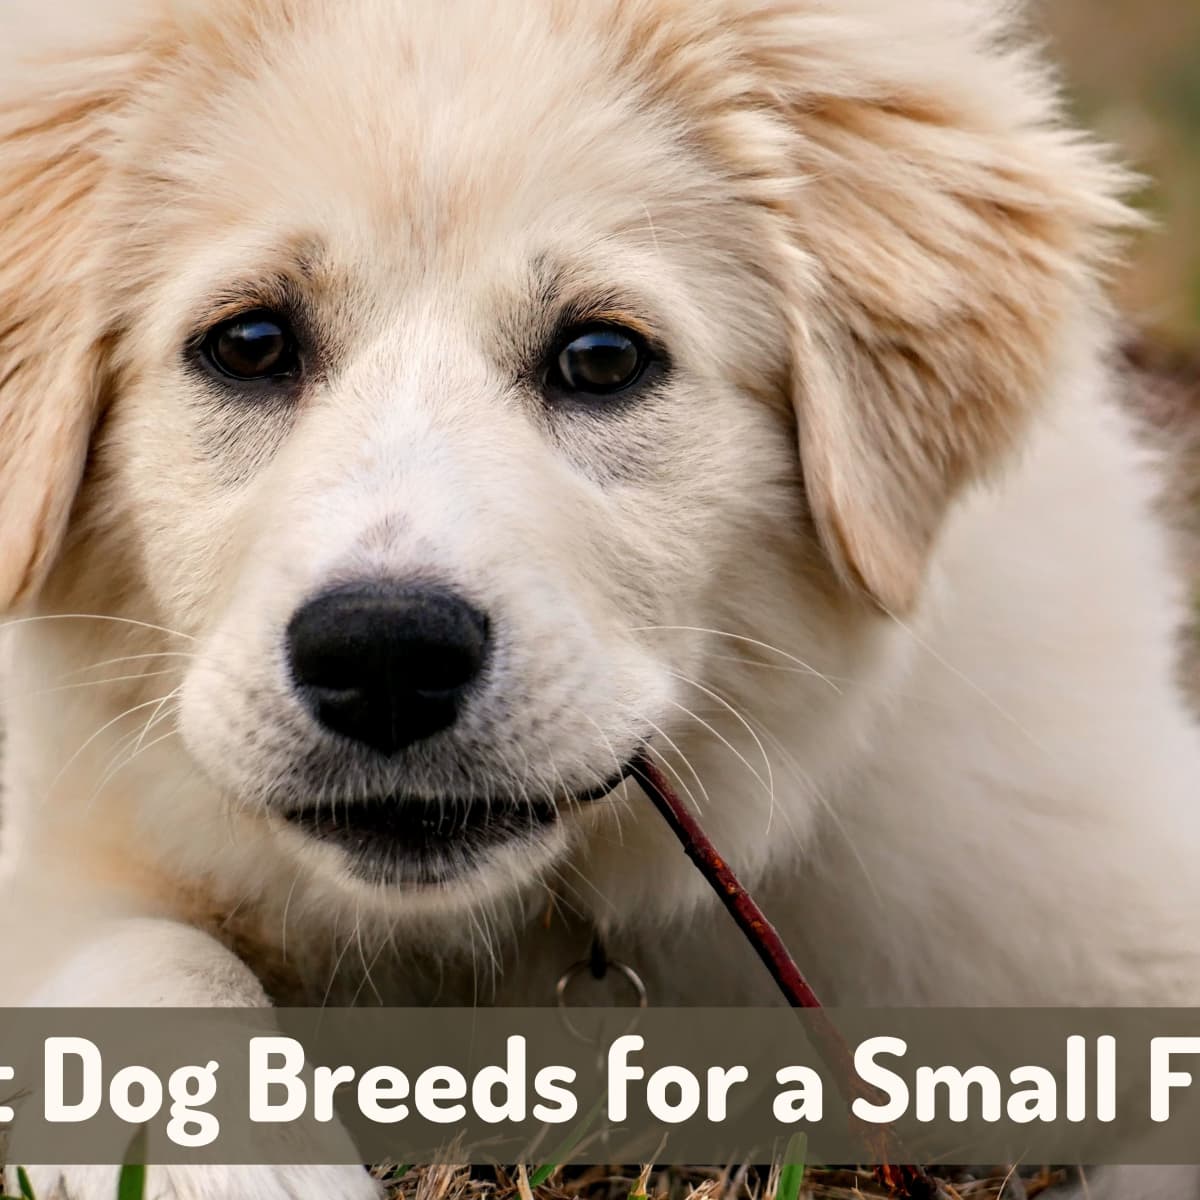 II. Factors to Consider When Choosing a Dog Breed for Small Yards